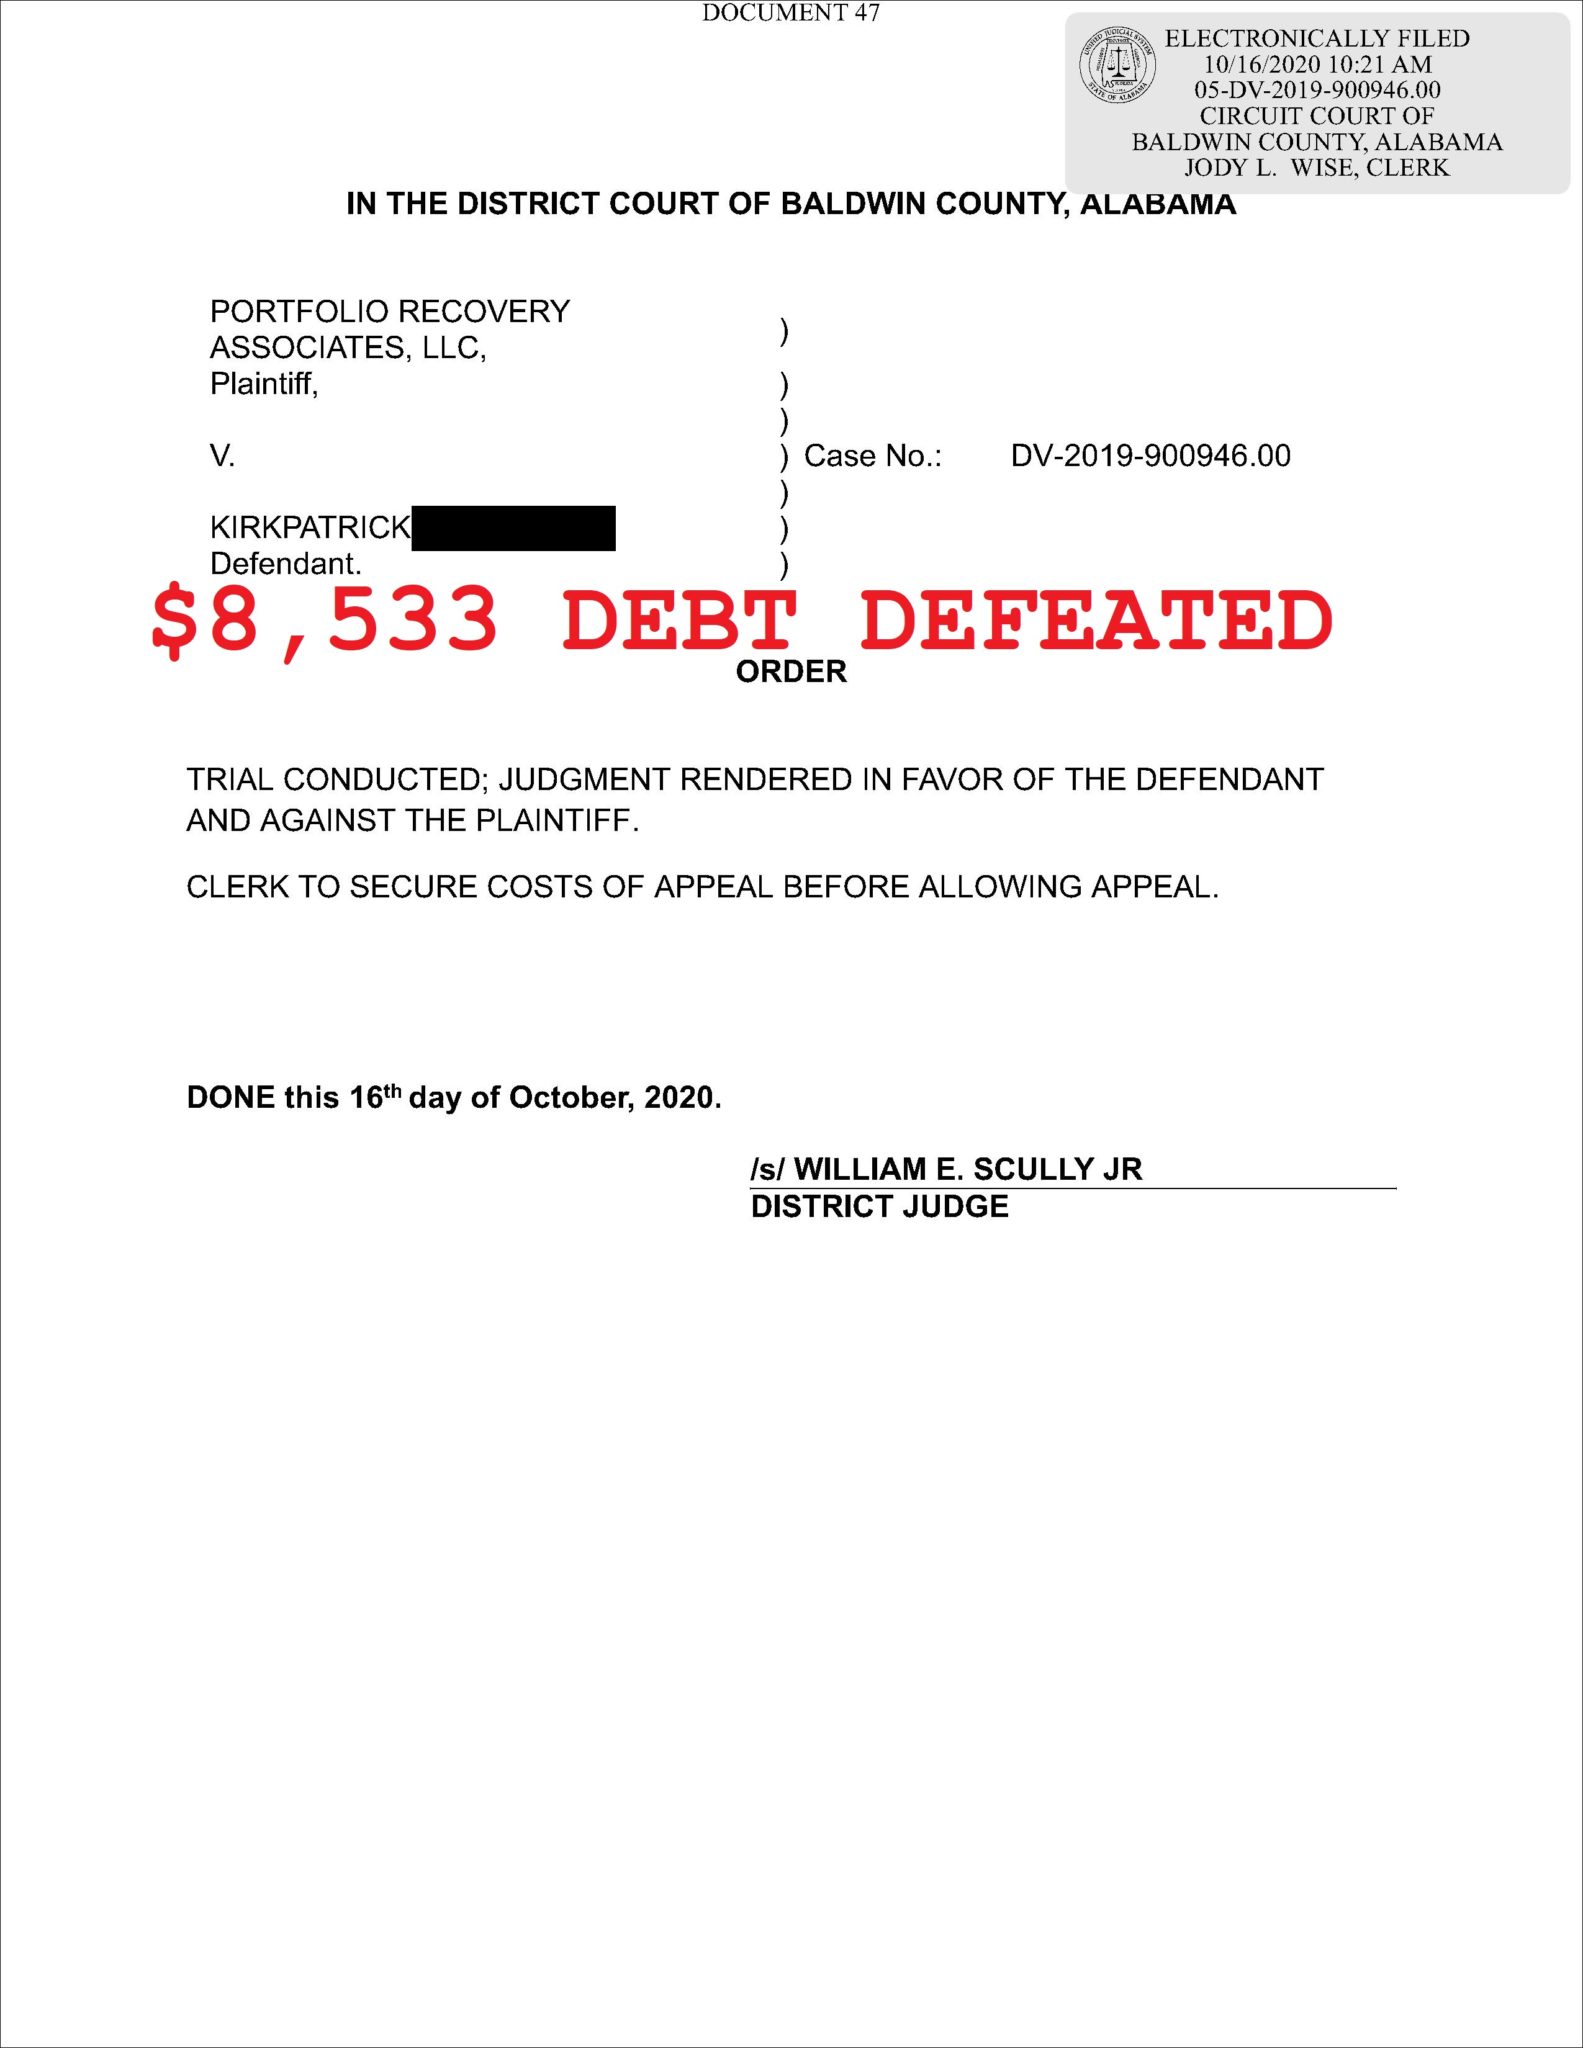 Debt Collection Lawsuit Wins in Alabama